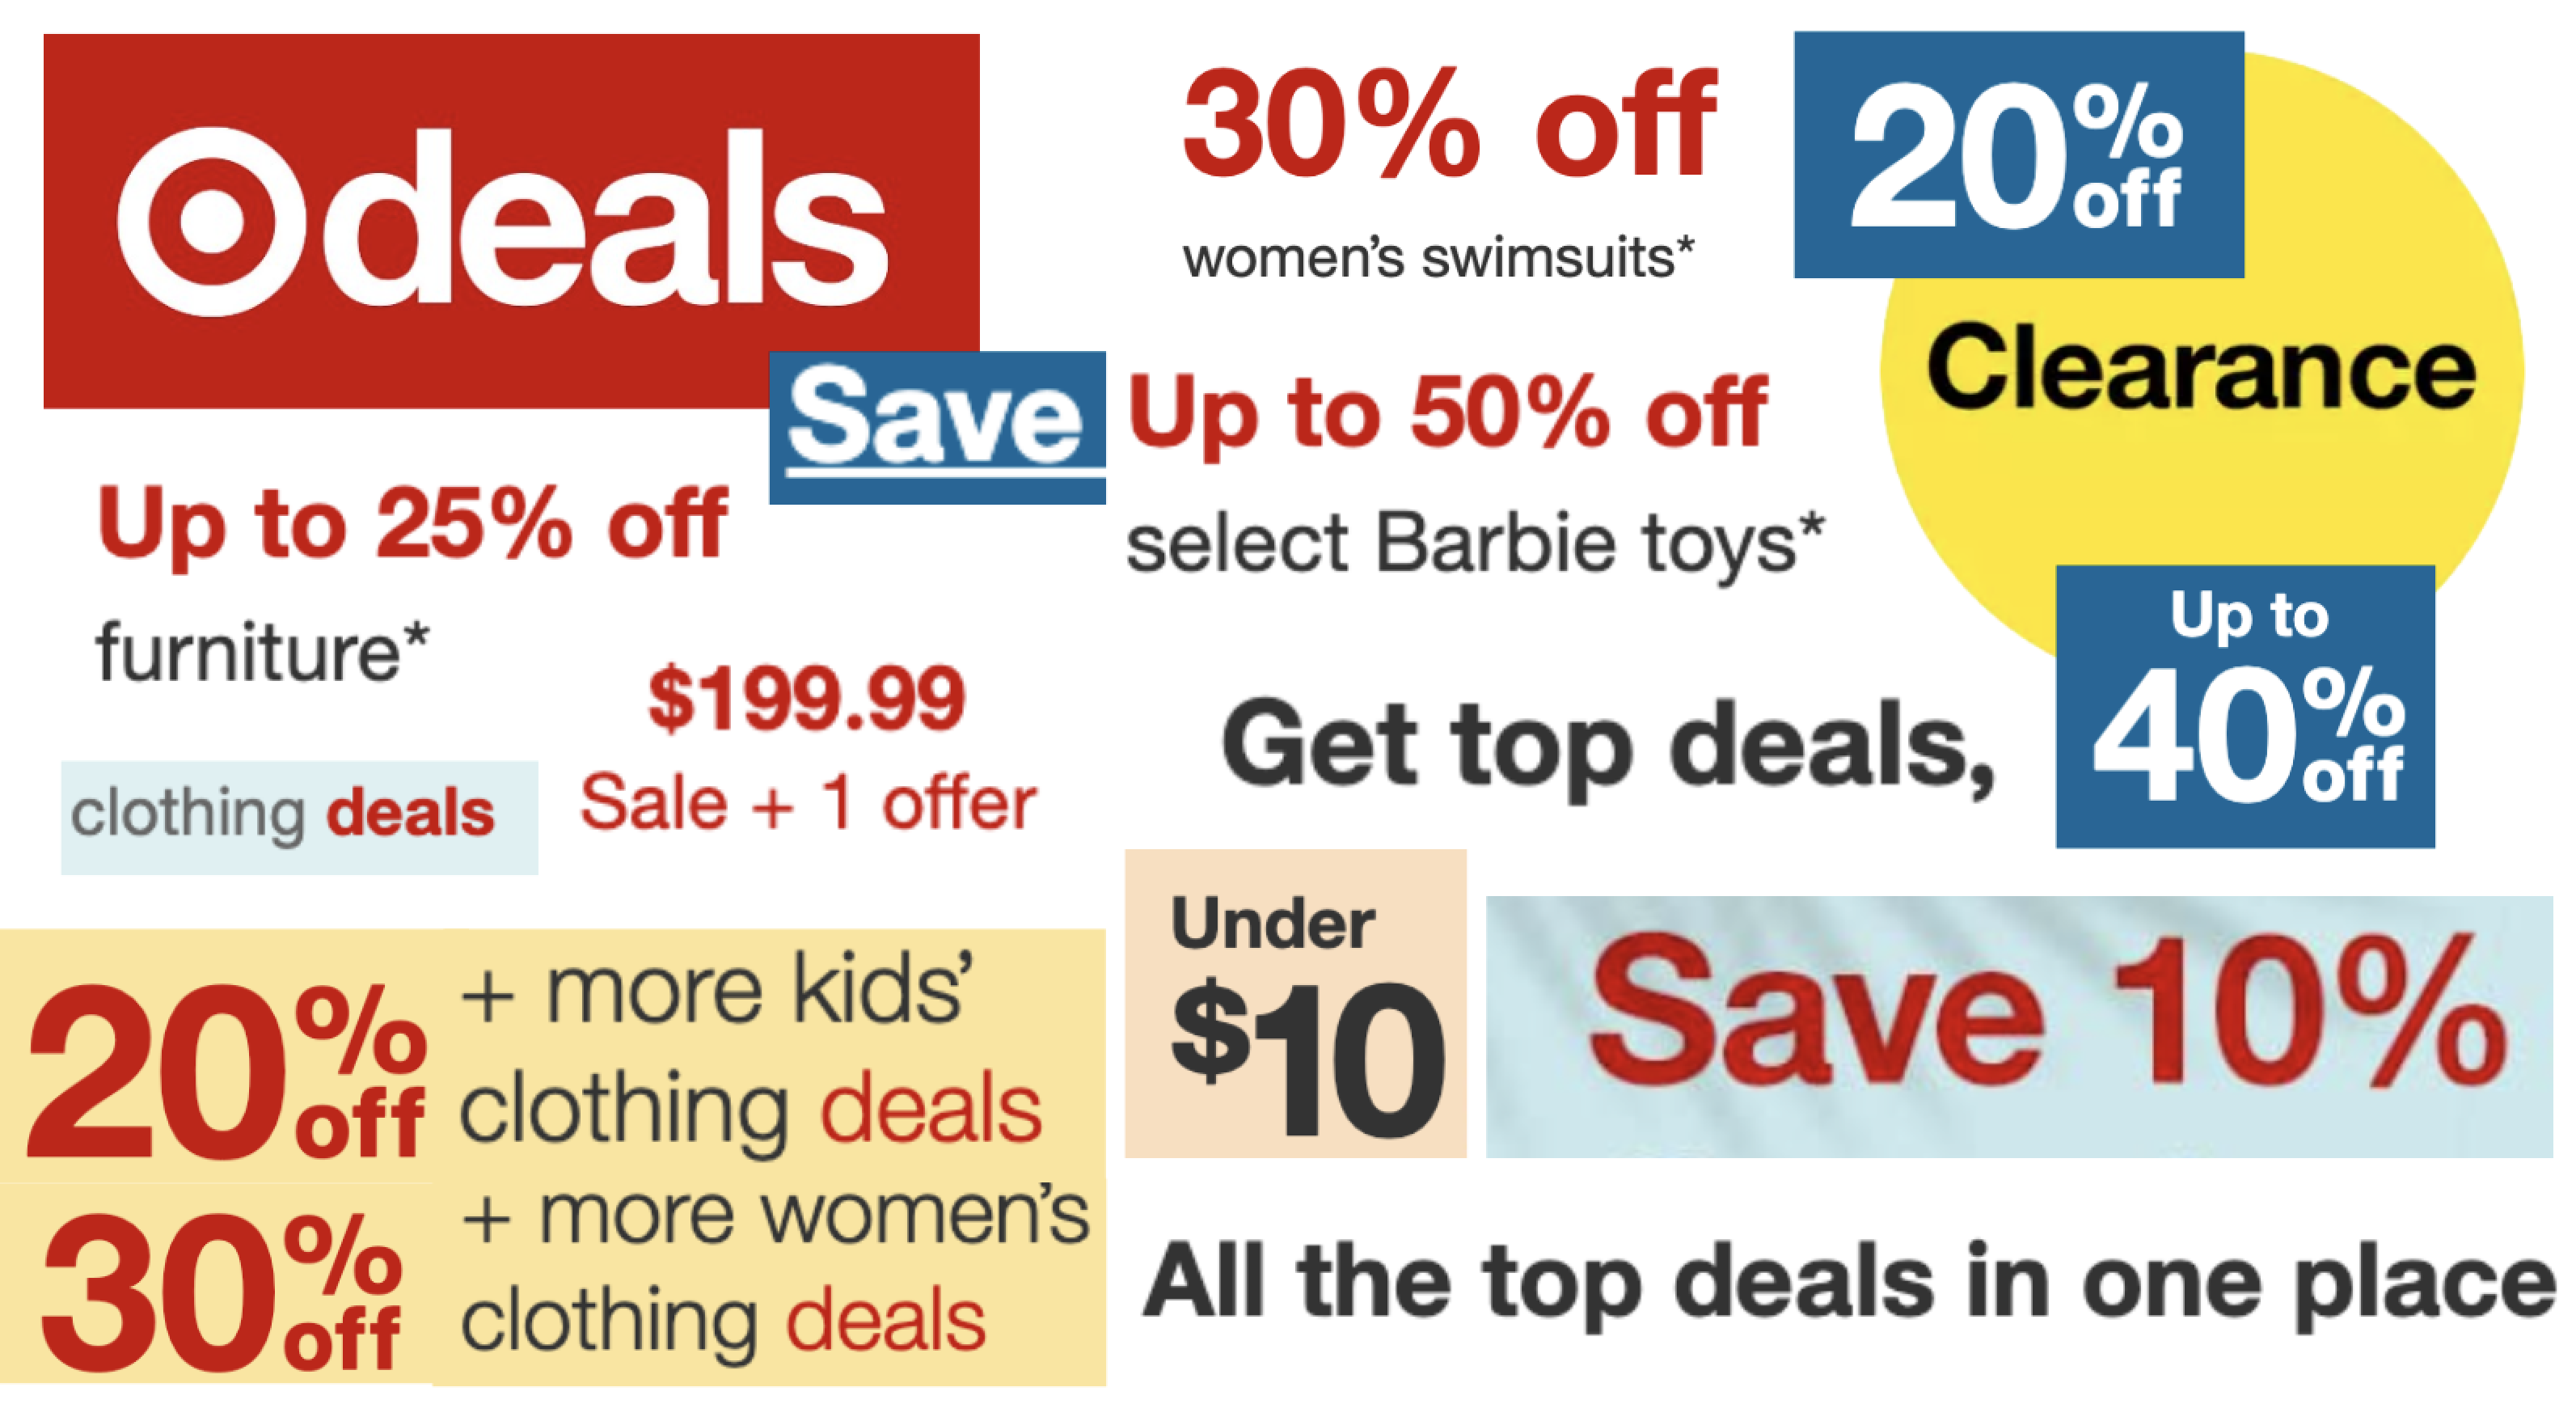 Target sale: Clearance prices extra 20% off to clear inventory overstock